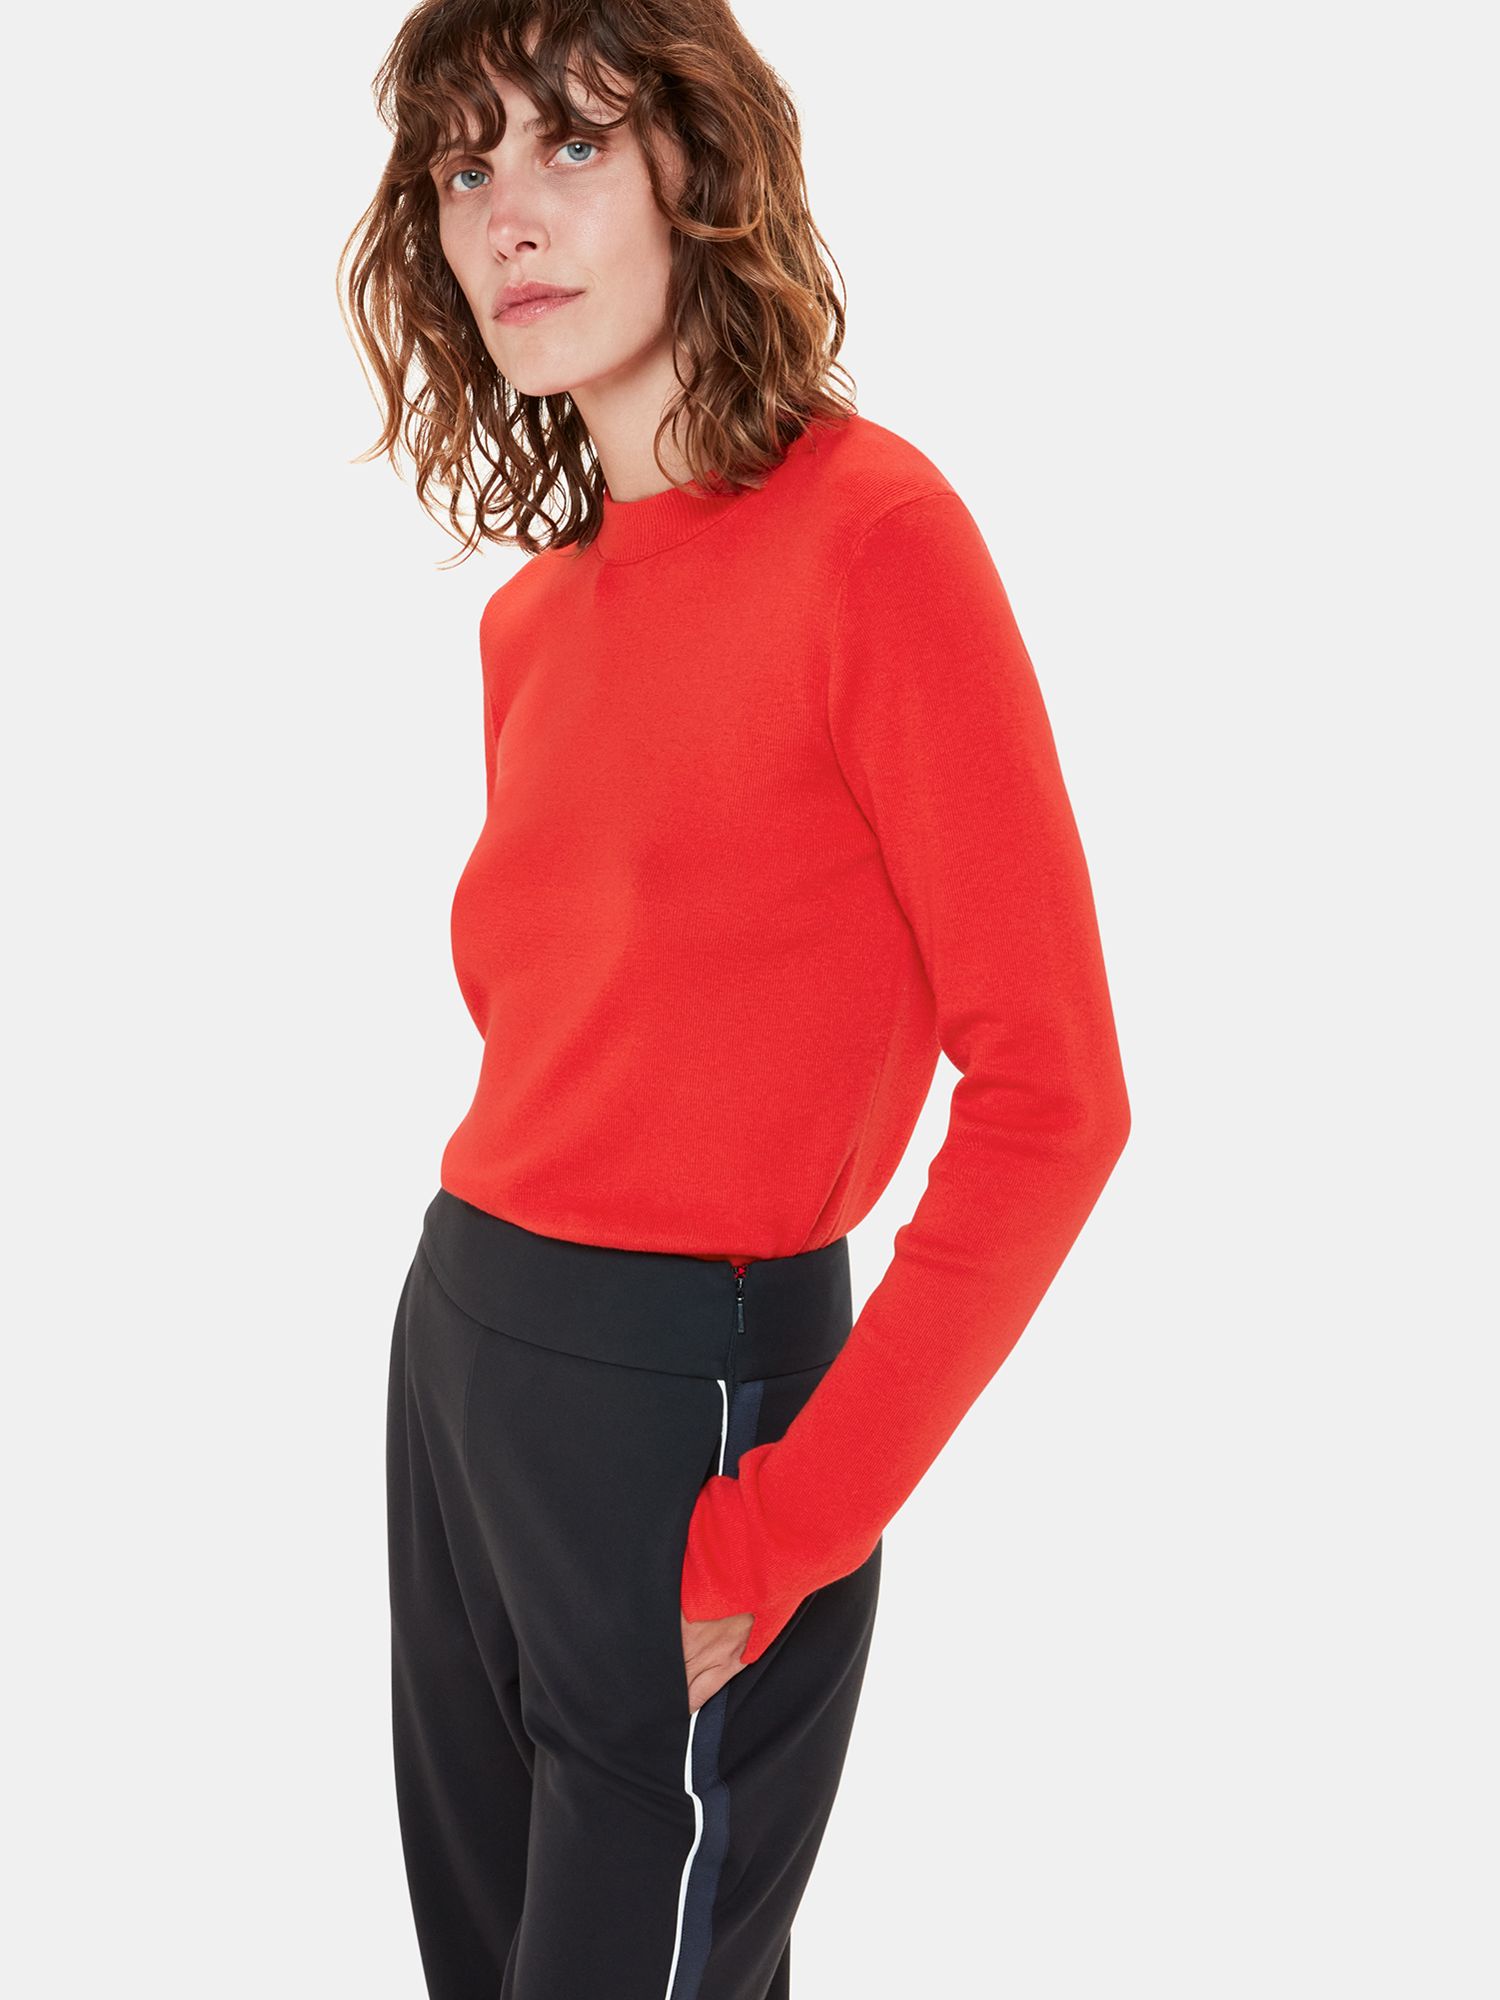 Whistles Mia Fitted Crew Neck Jumper, Red, Red at John Lewis & Partners